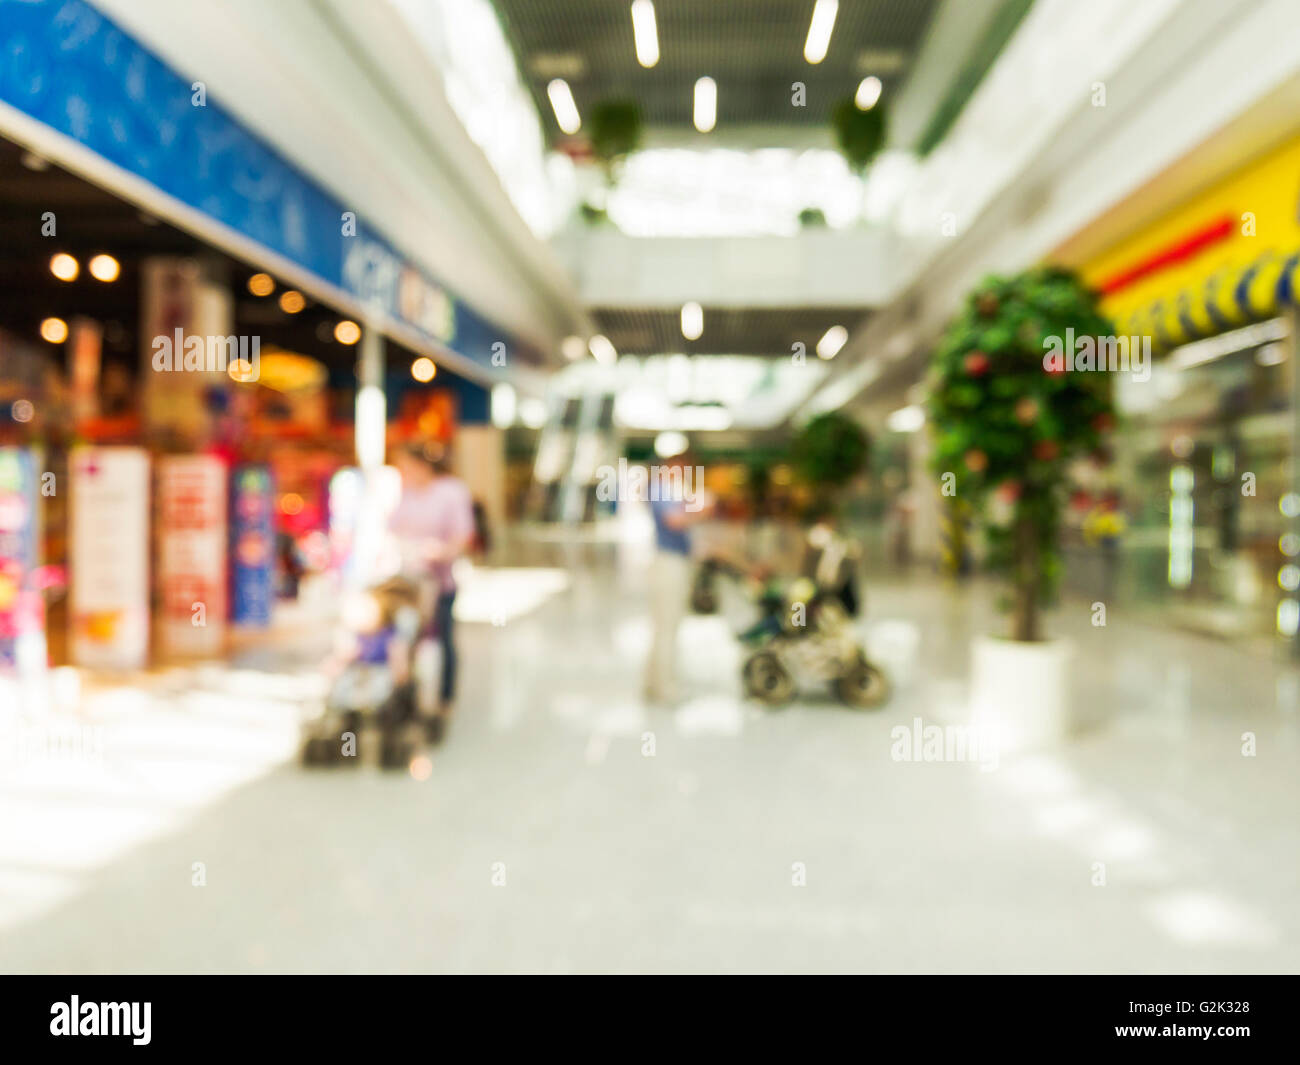 Abstract background of shopping mall with unrecognizable persons with stroller, shallow depth of focus. Stock Photo